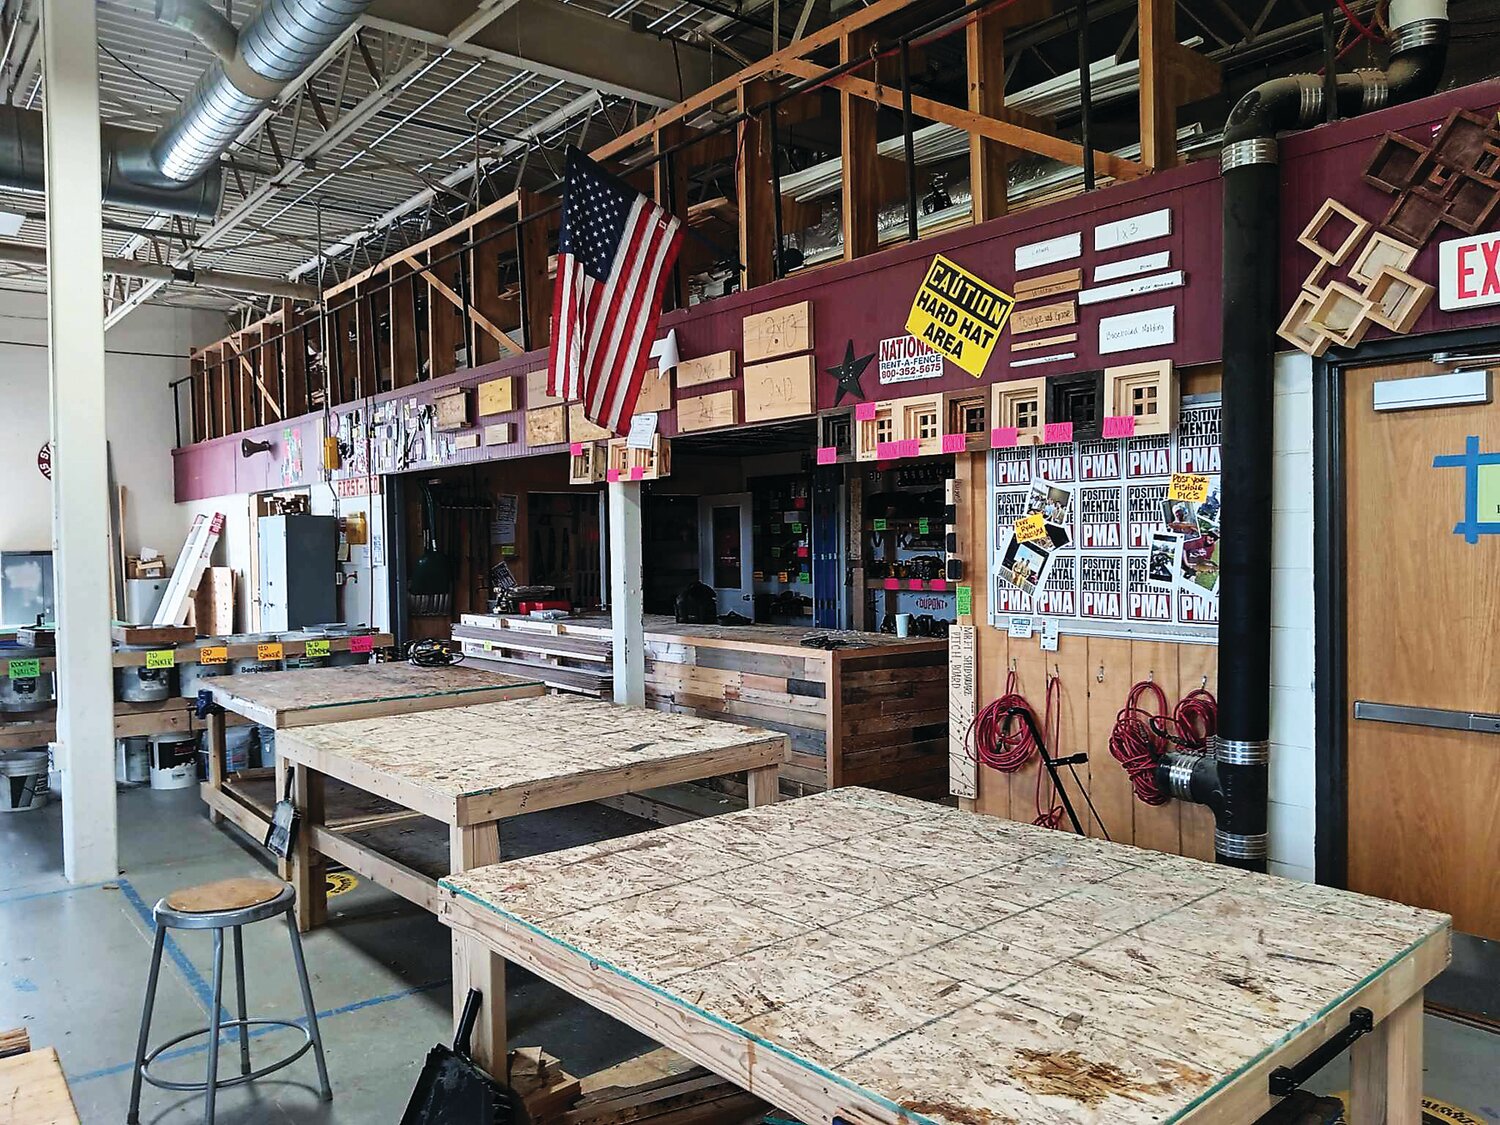 Middle Bucks Institute of Technology offers hands-on classes in Architecture & Construction Engineering, Automotive Technology, Building Trades Occupations, Construction Carpentry and many other courses in classrooms like this.